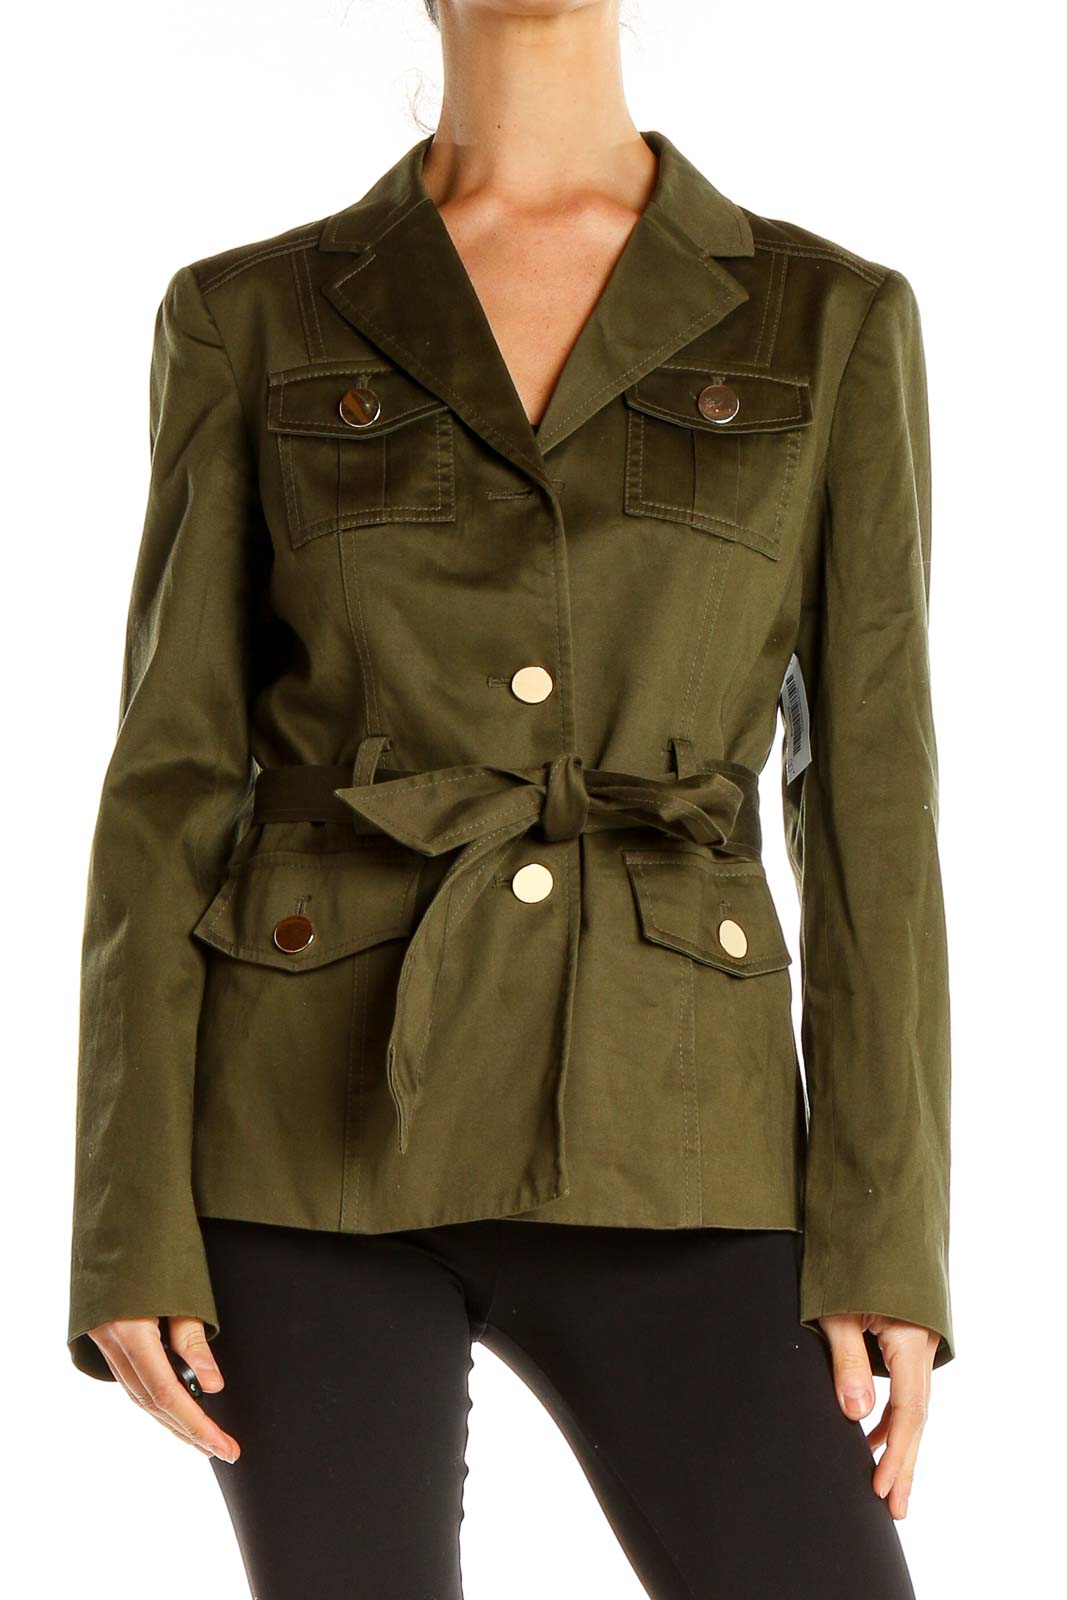 Green Military Jacket Front